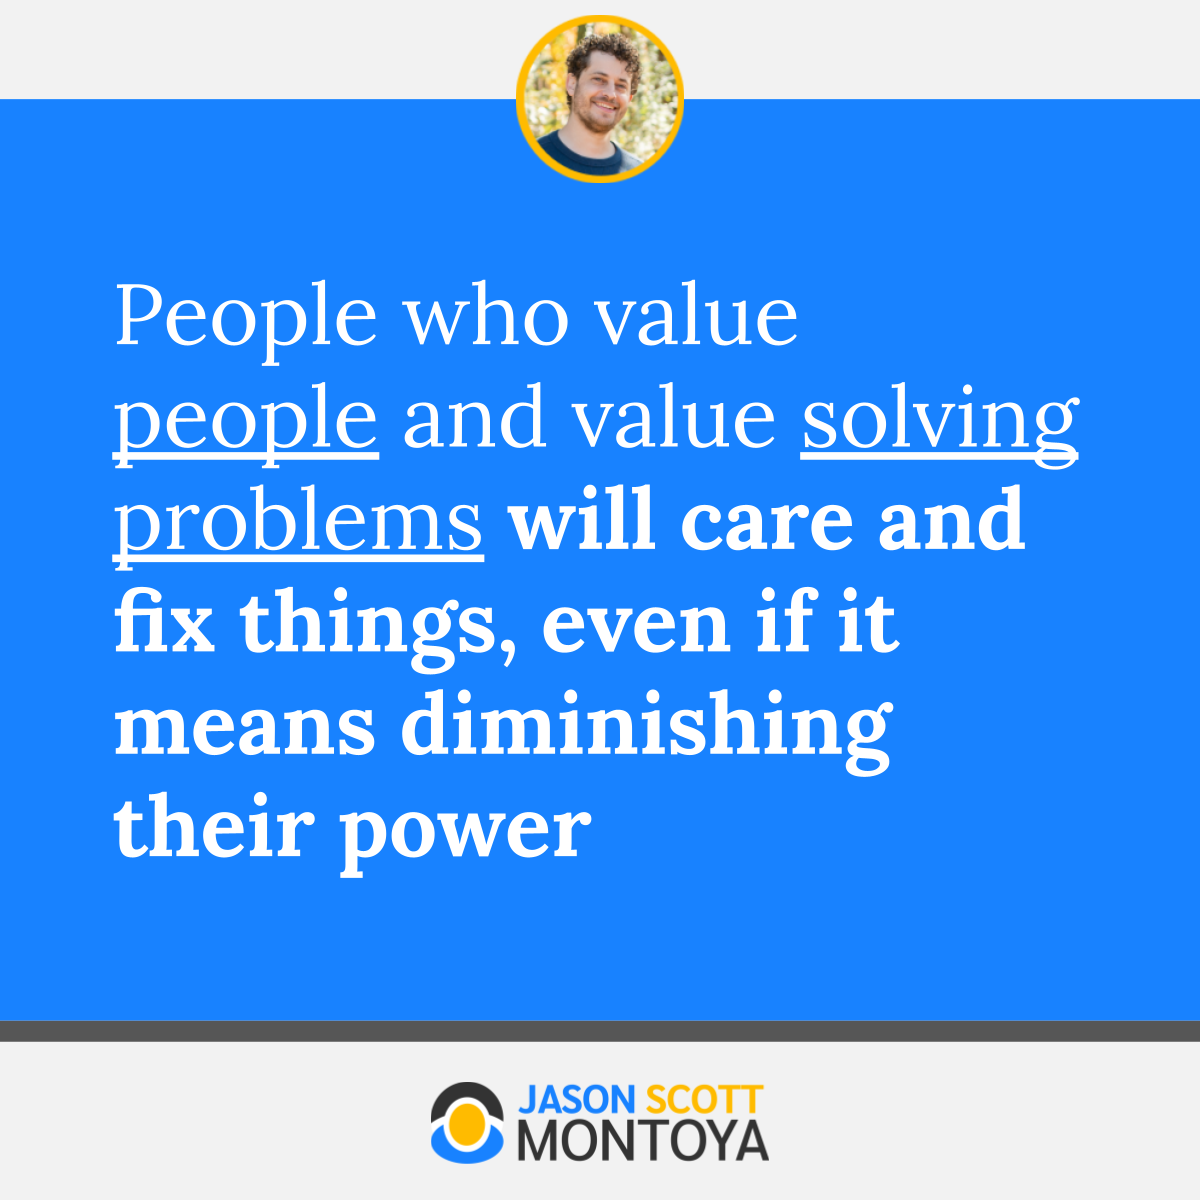 People who value people and value solving problems will care and fix things, even if it means diminishing their power